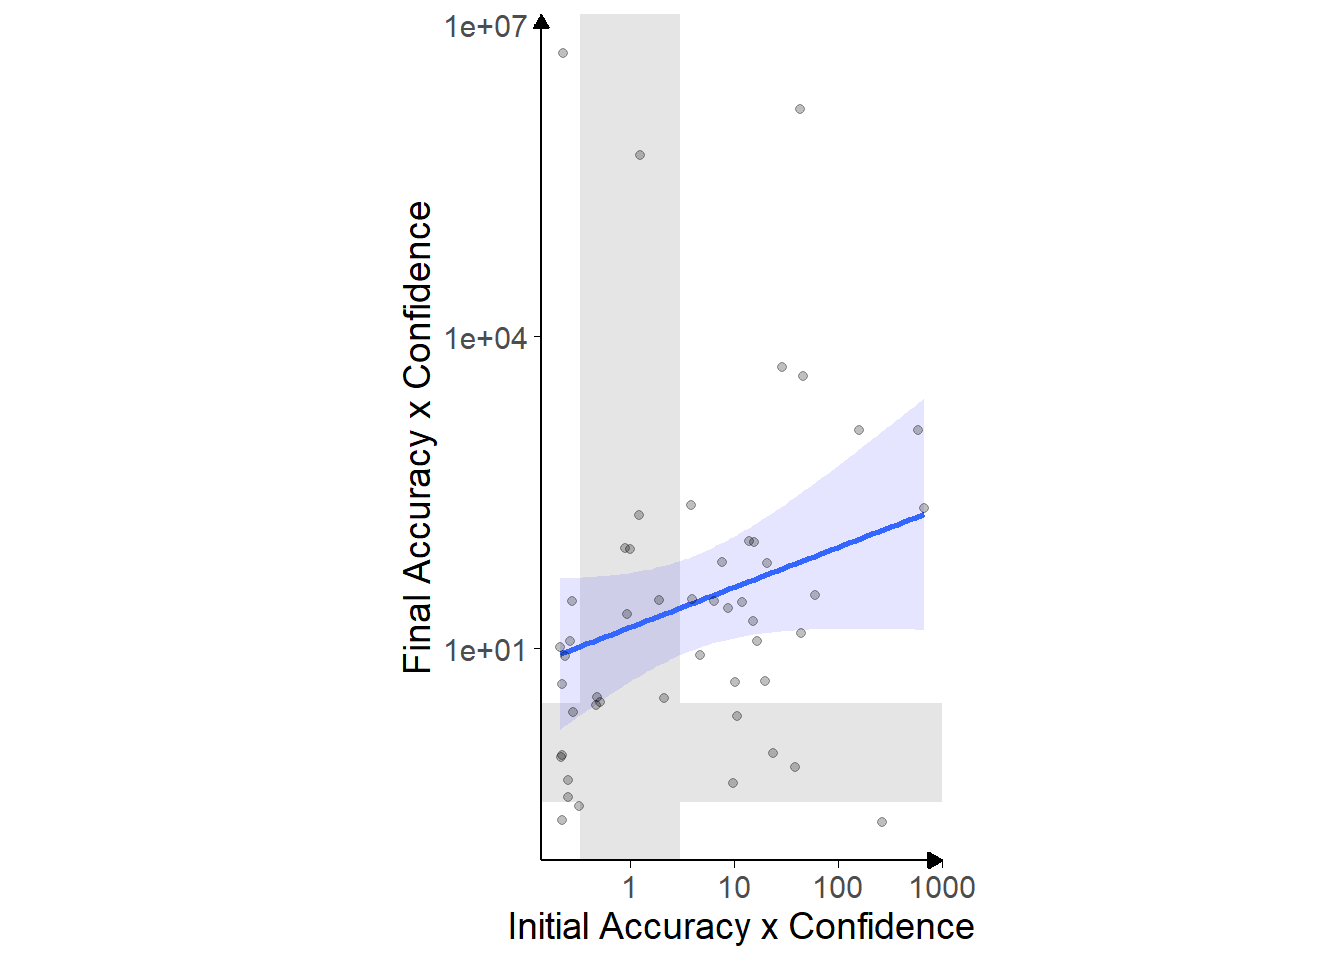 Accuracy x Confidence correlations for Dots task with in/accurate advisors.<br/> Each point marks the Bayes factor for a participant's correlation between their initial accuracy and confidence (horizontal axis) and final accuracy and confidence (vertical axis). Shaded bands show areas of no information (1/3 < BF < 3), with evidence for a correlation rightwards and upwards of the area and evidence against below and leftwards. Note that the Bayes factor is a measure of the likelihood the correlation is not 0, not a direct measure of the strength of the correlation. The blue line indicates the overall pattern, with shaded area giving the 95\% confidence intervals. Axes use $\text{log}_{10}$ scale.